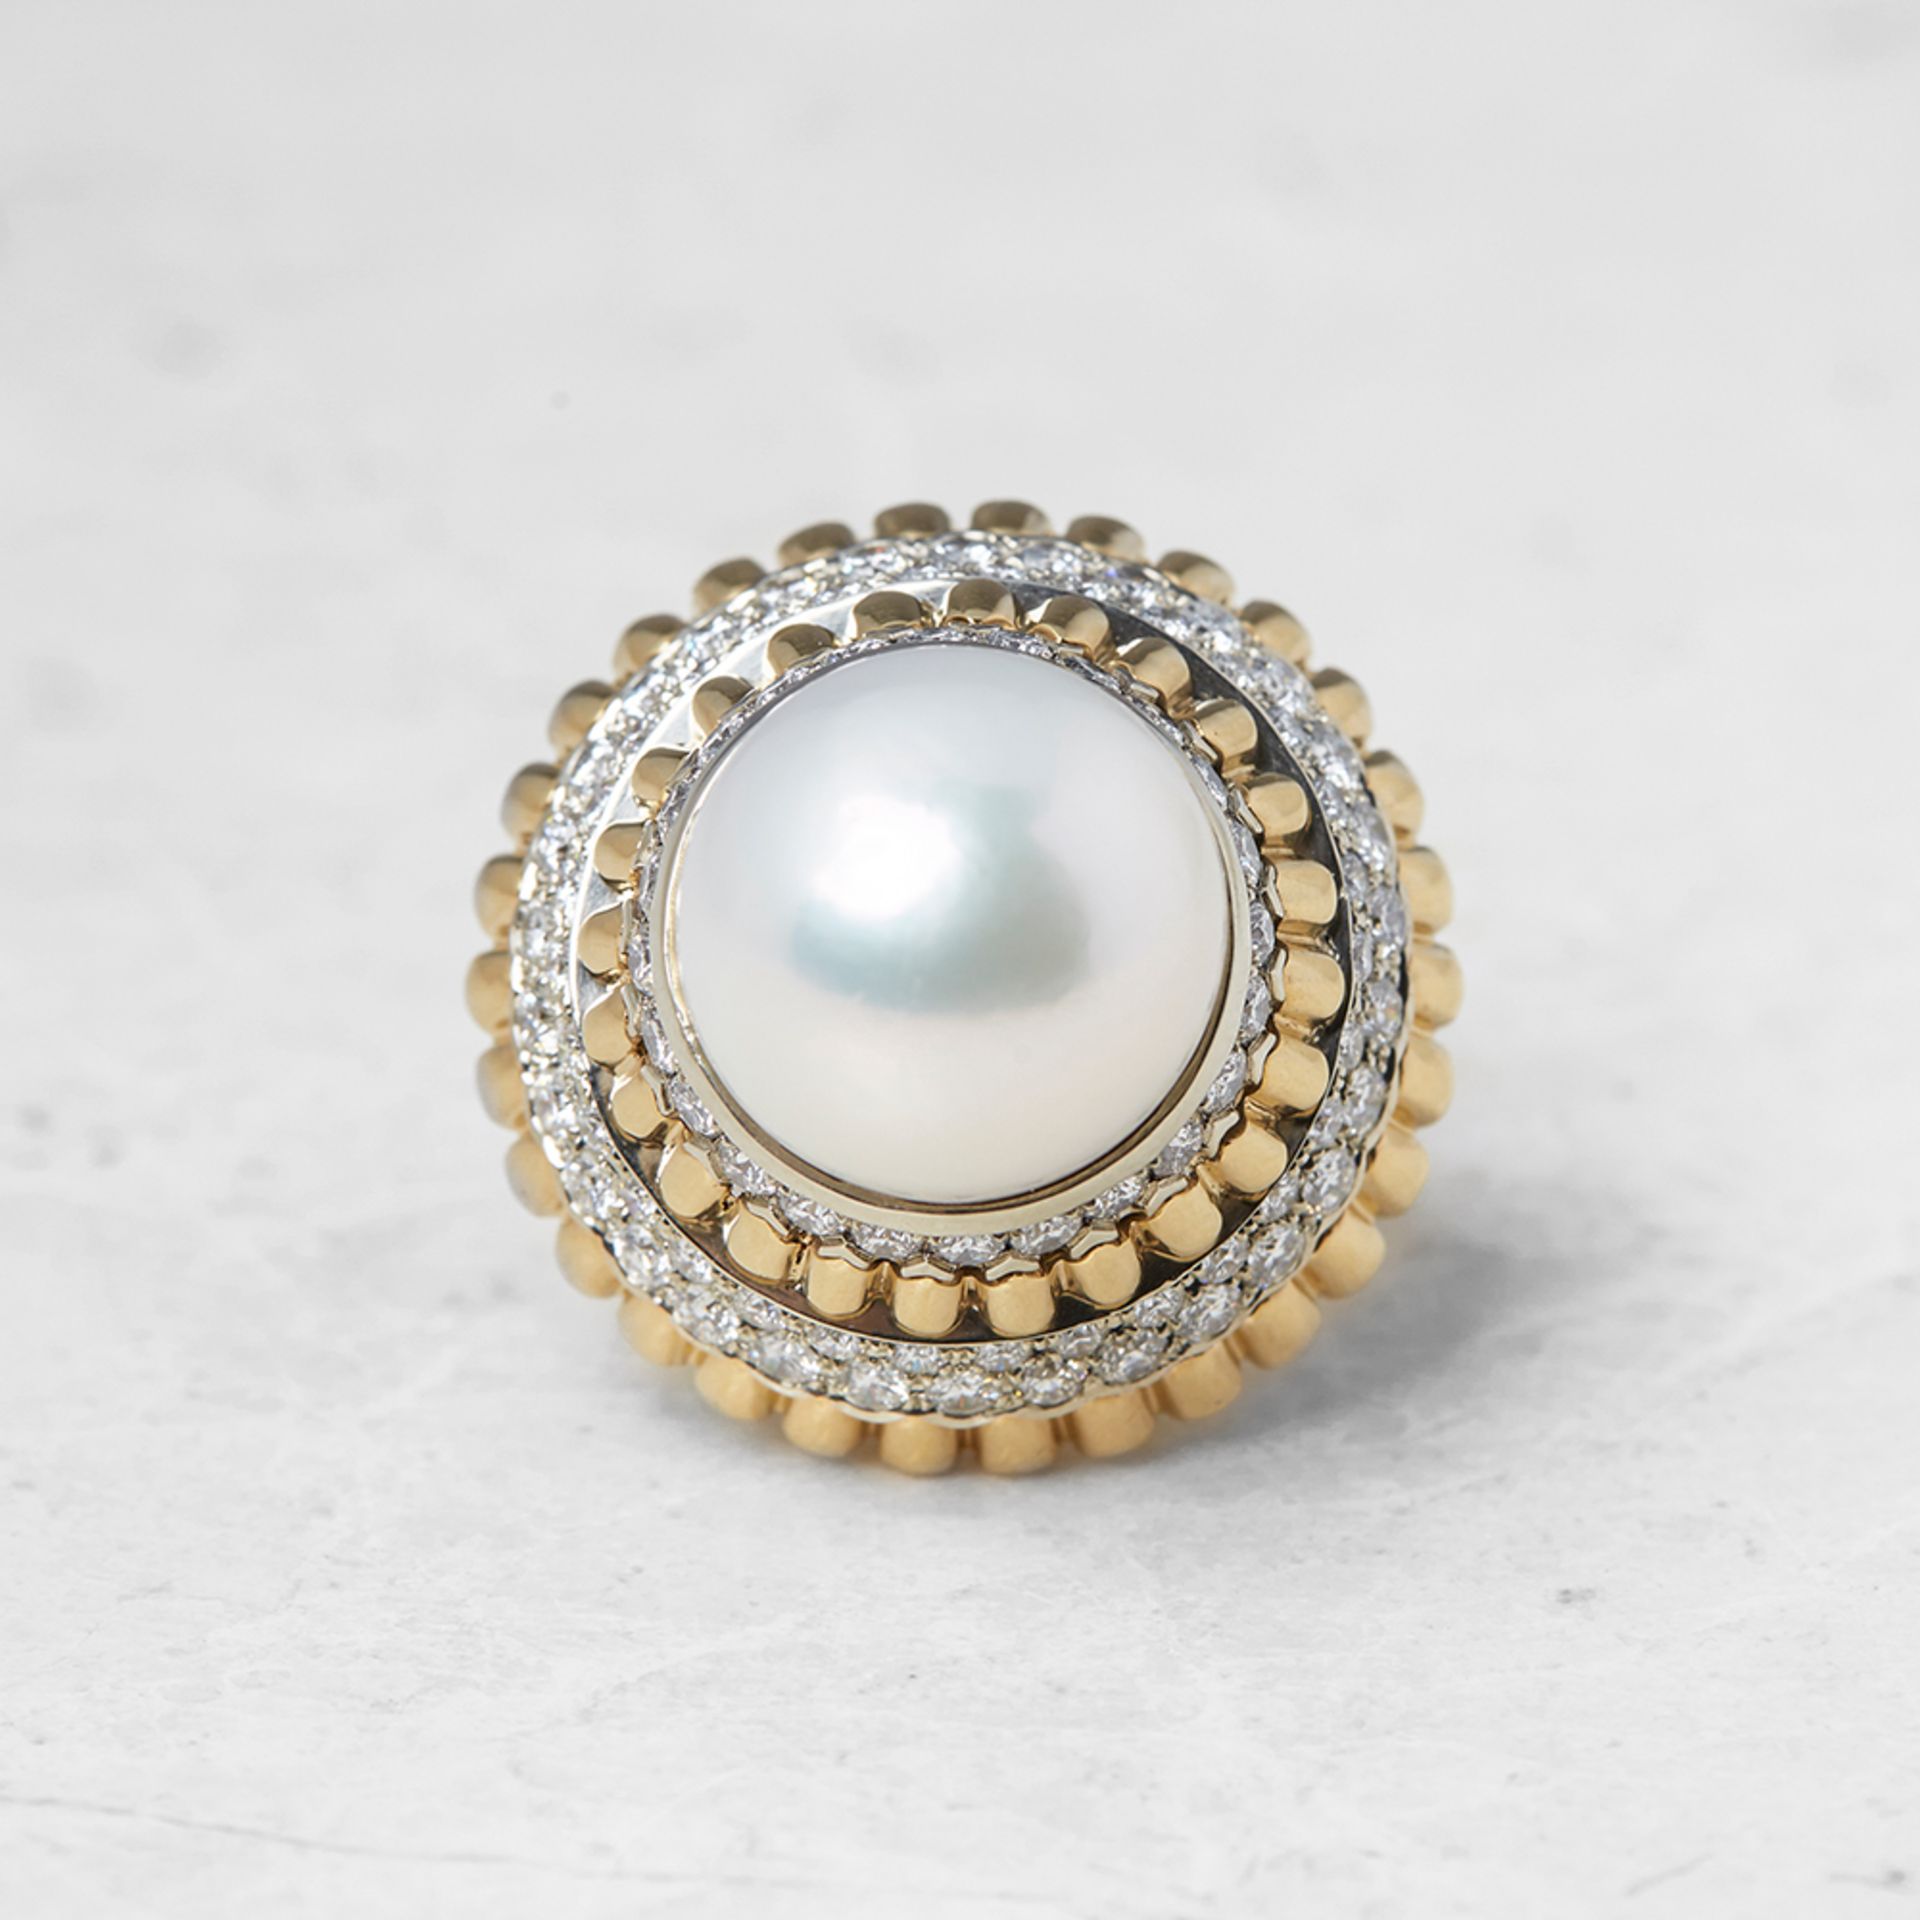 Van Cleef & Arpels 18k Yellow Gold Pearl & Diamond Ring with Van Cleef & Arpels Pouch - Image 2 of 10